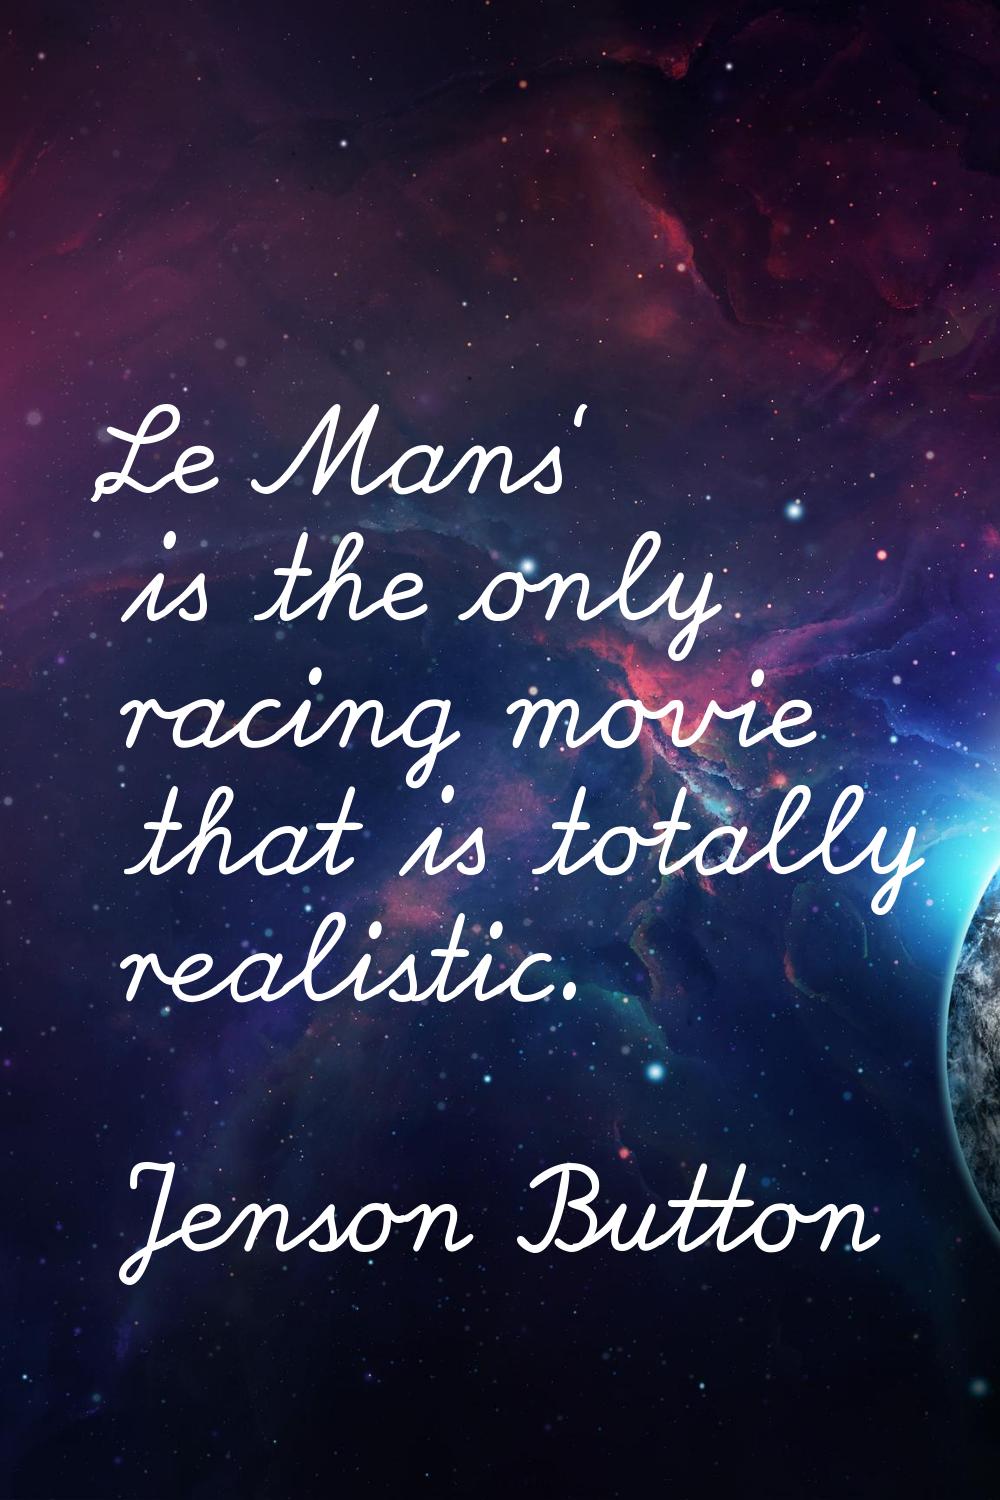 'Le Mans' is the only racing movie that is totally realistic.